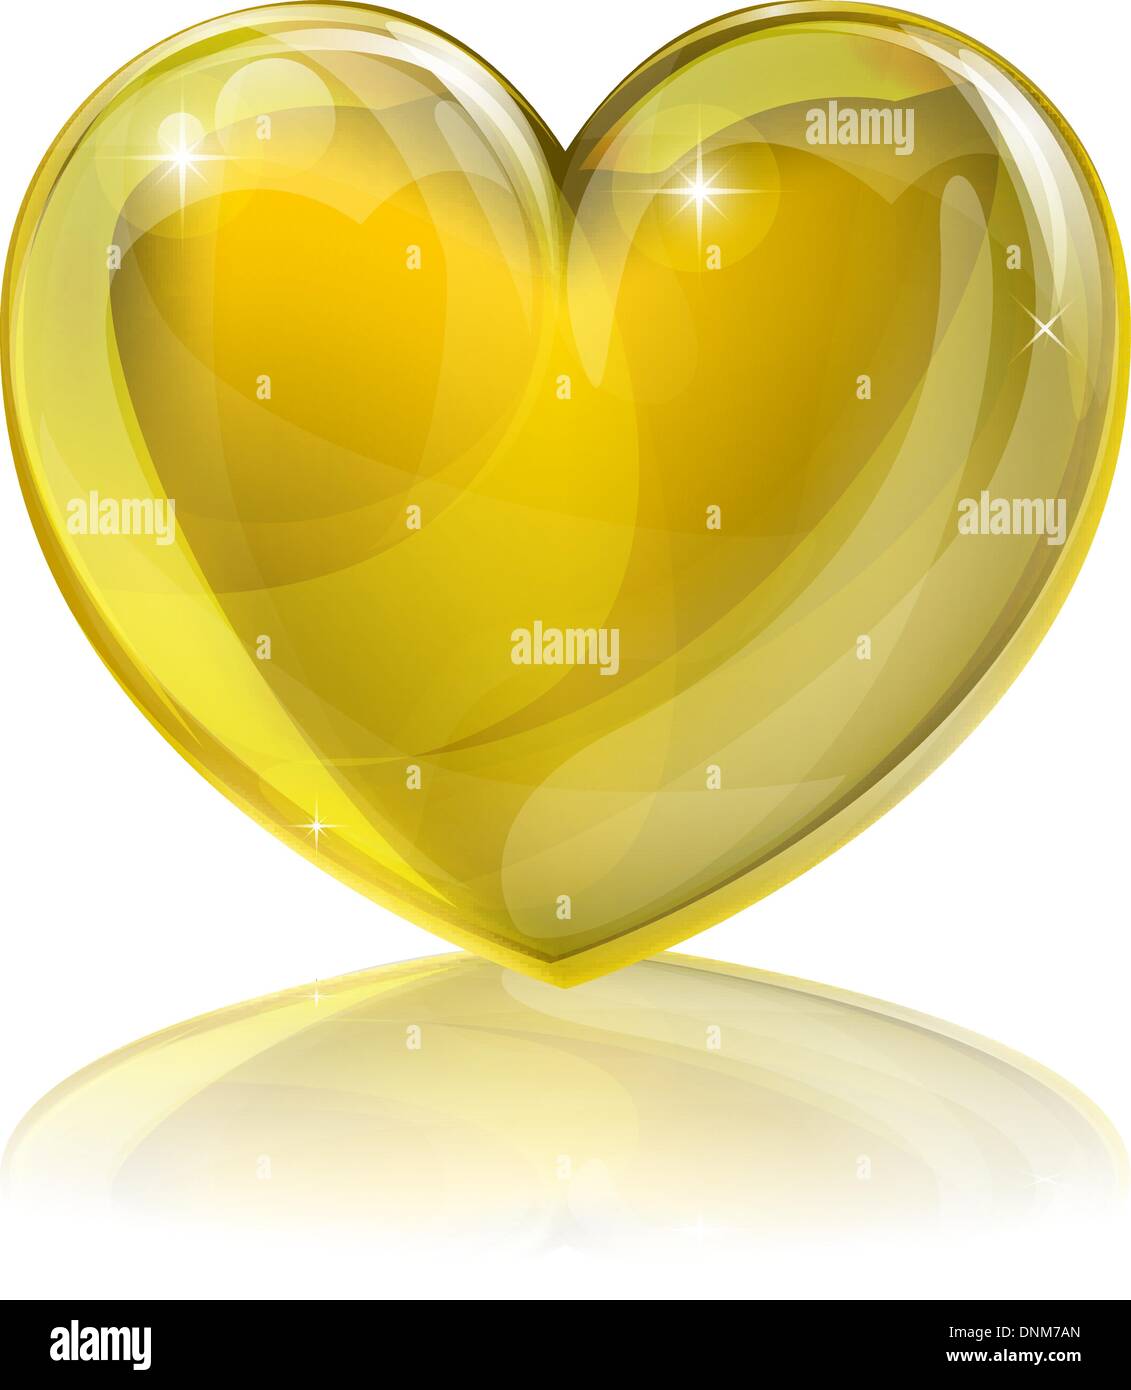 A golden heart concept. Could be for a “heart of gold”, i.e. kind or loving or an award for good service or similar. Stock Vector